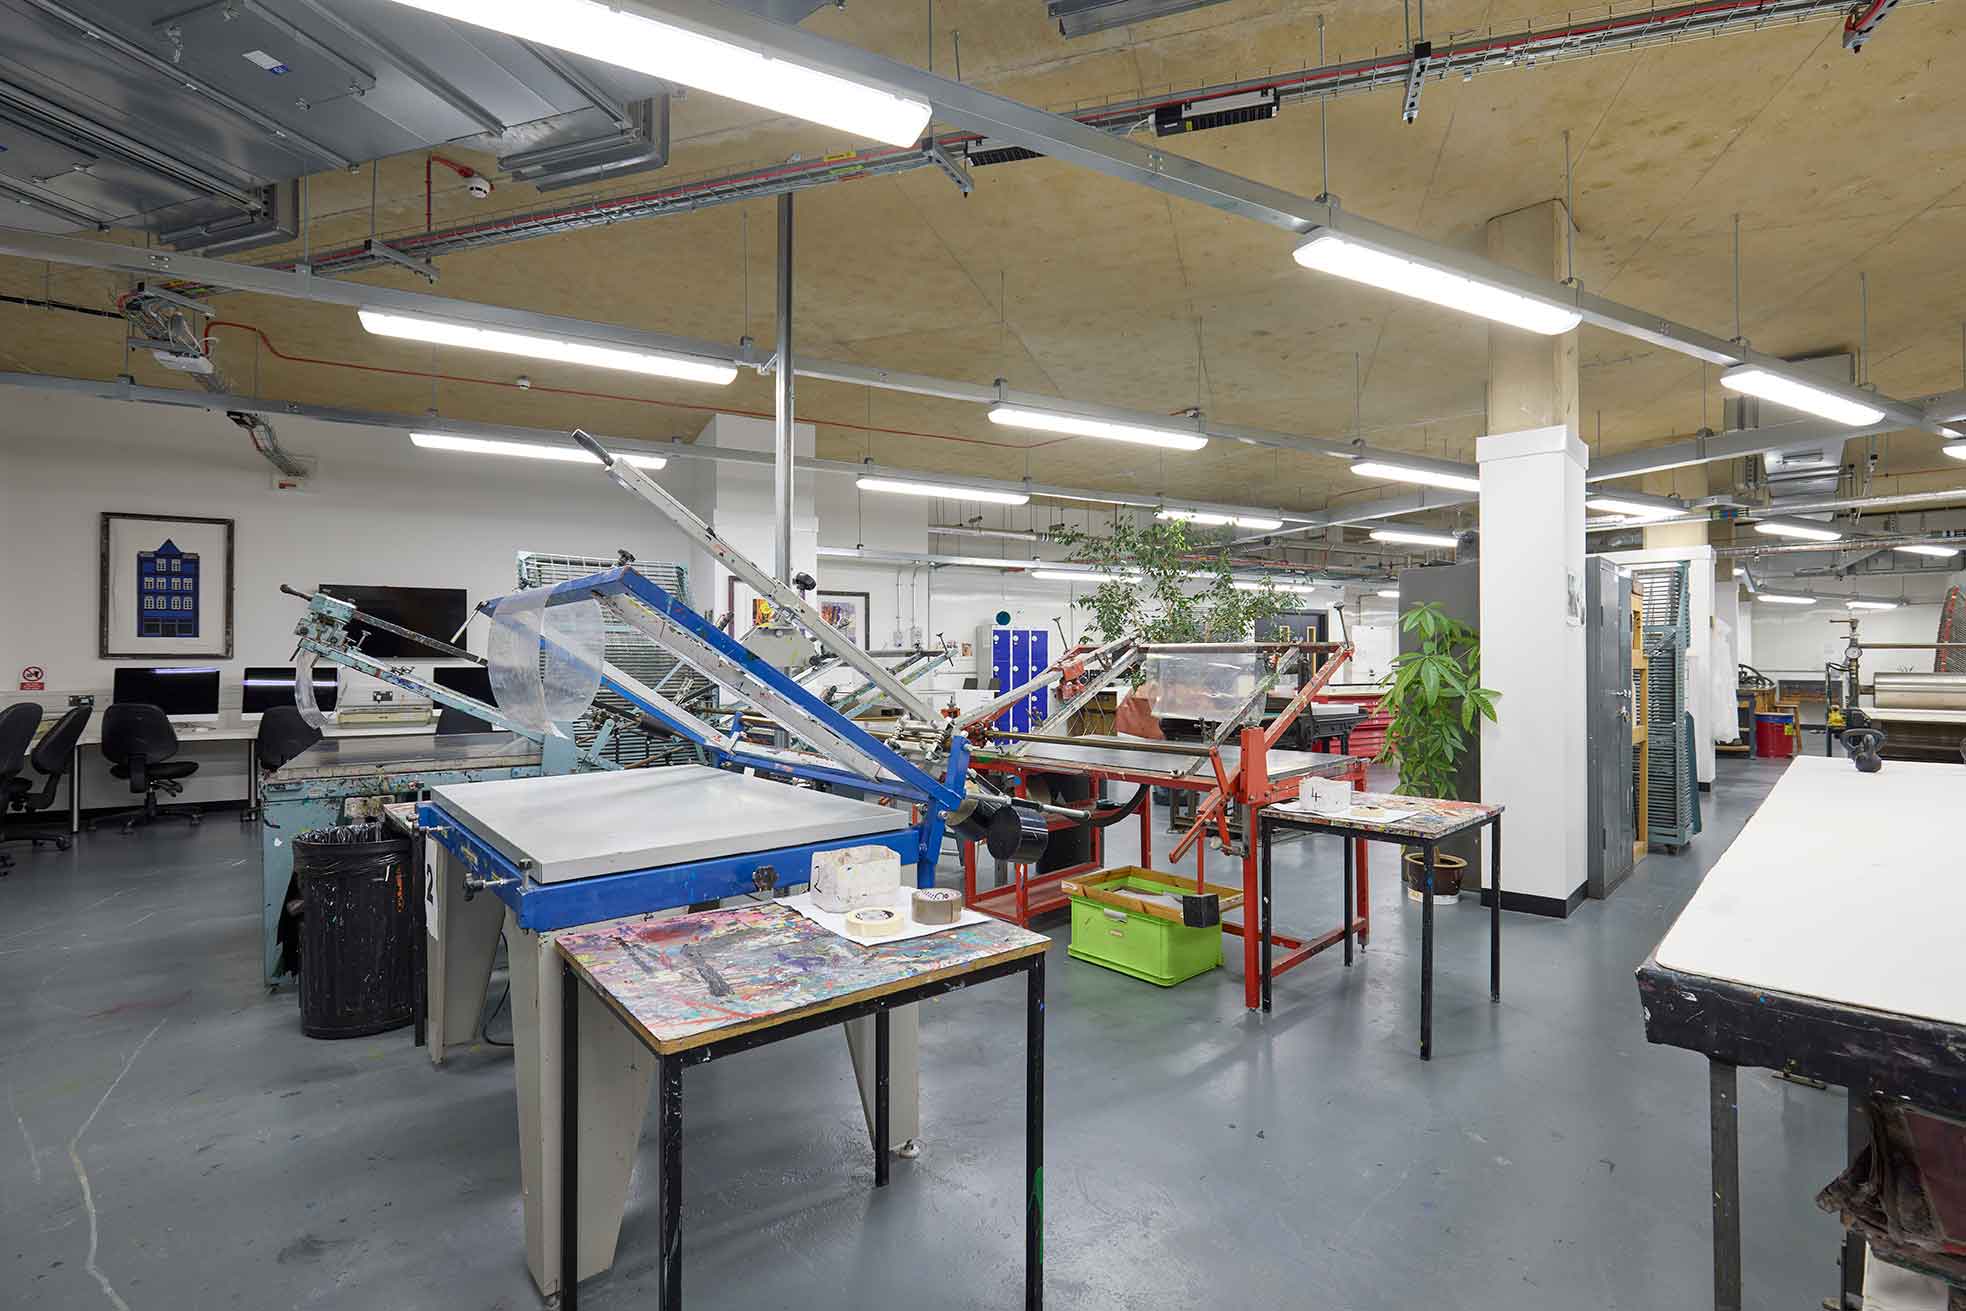 The photo shows the printmaking workshop at the University of Northampton. In the foreground are blue and white print presses and in the background is a variety of print-making equipment